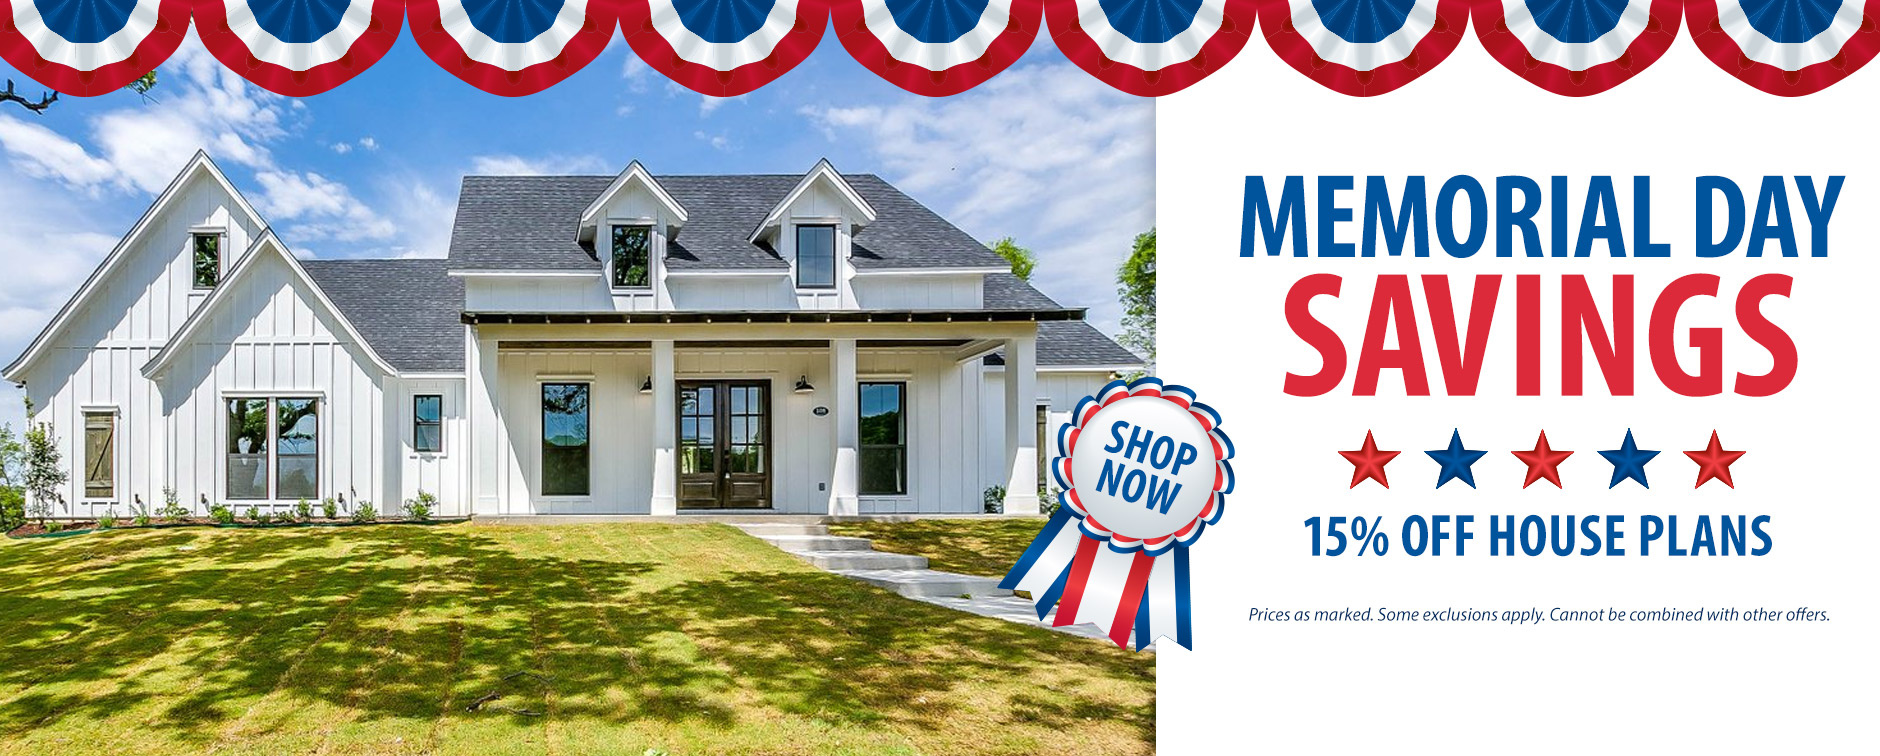 Memorial Day Savings: 15% Off House Plans